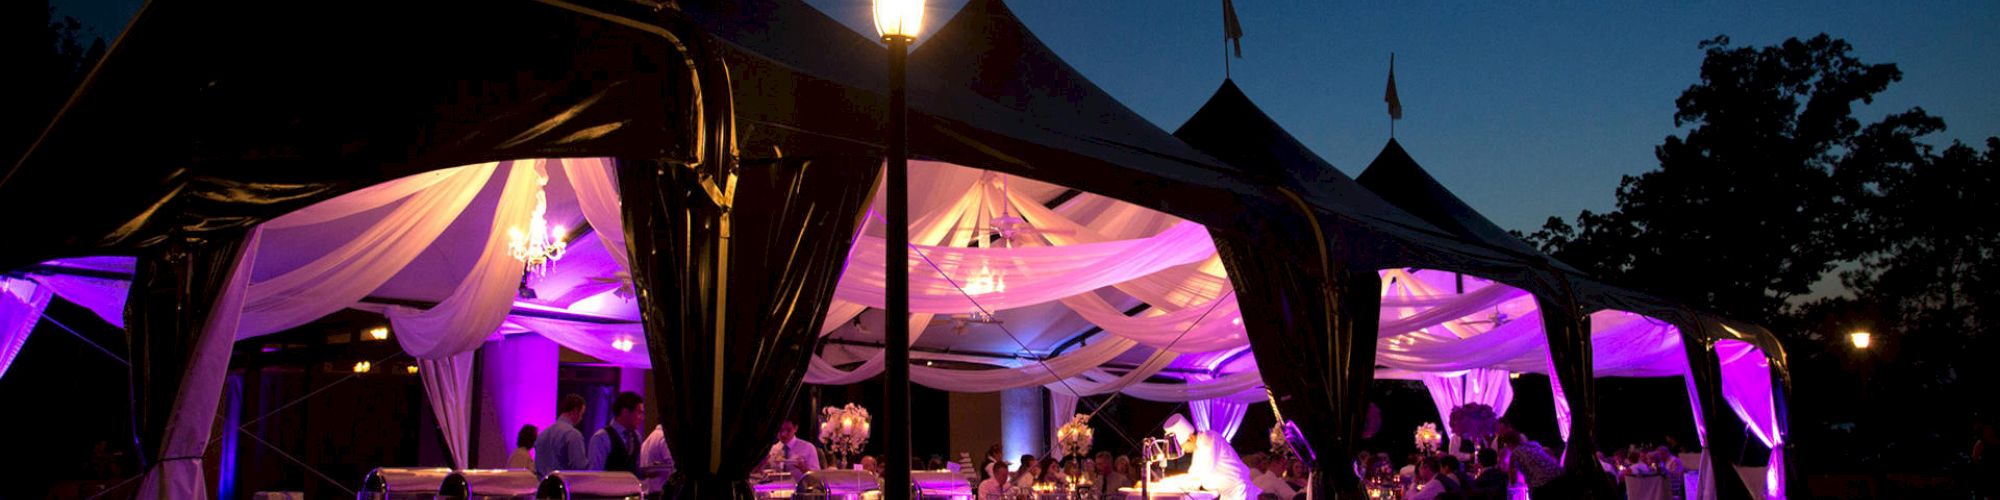 An outdoor event under a tent with white drapes and purple lighting, featuring tables set up and guests mingling under a night sky ending the sentence.